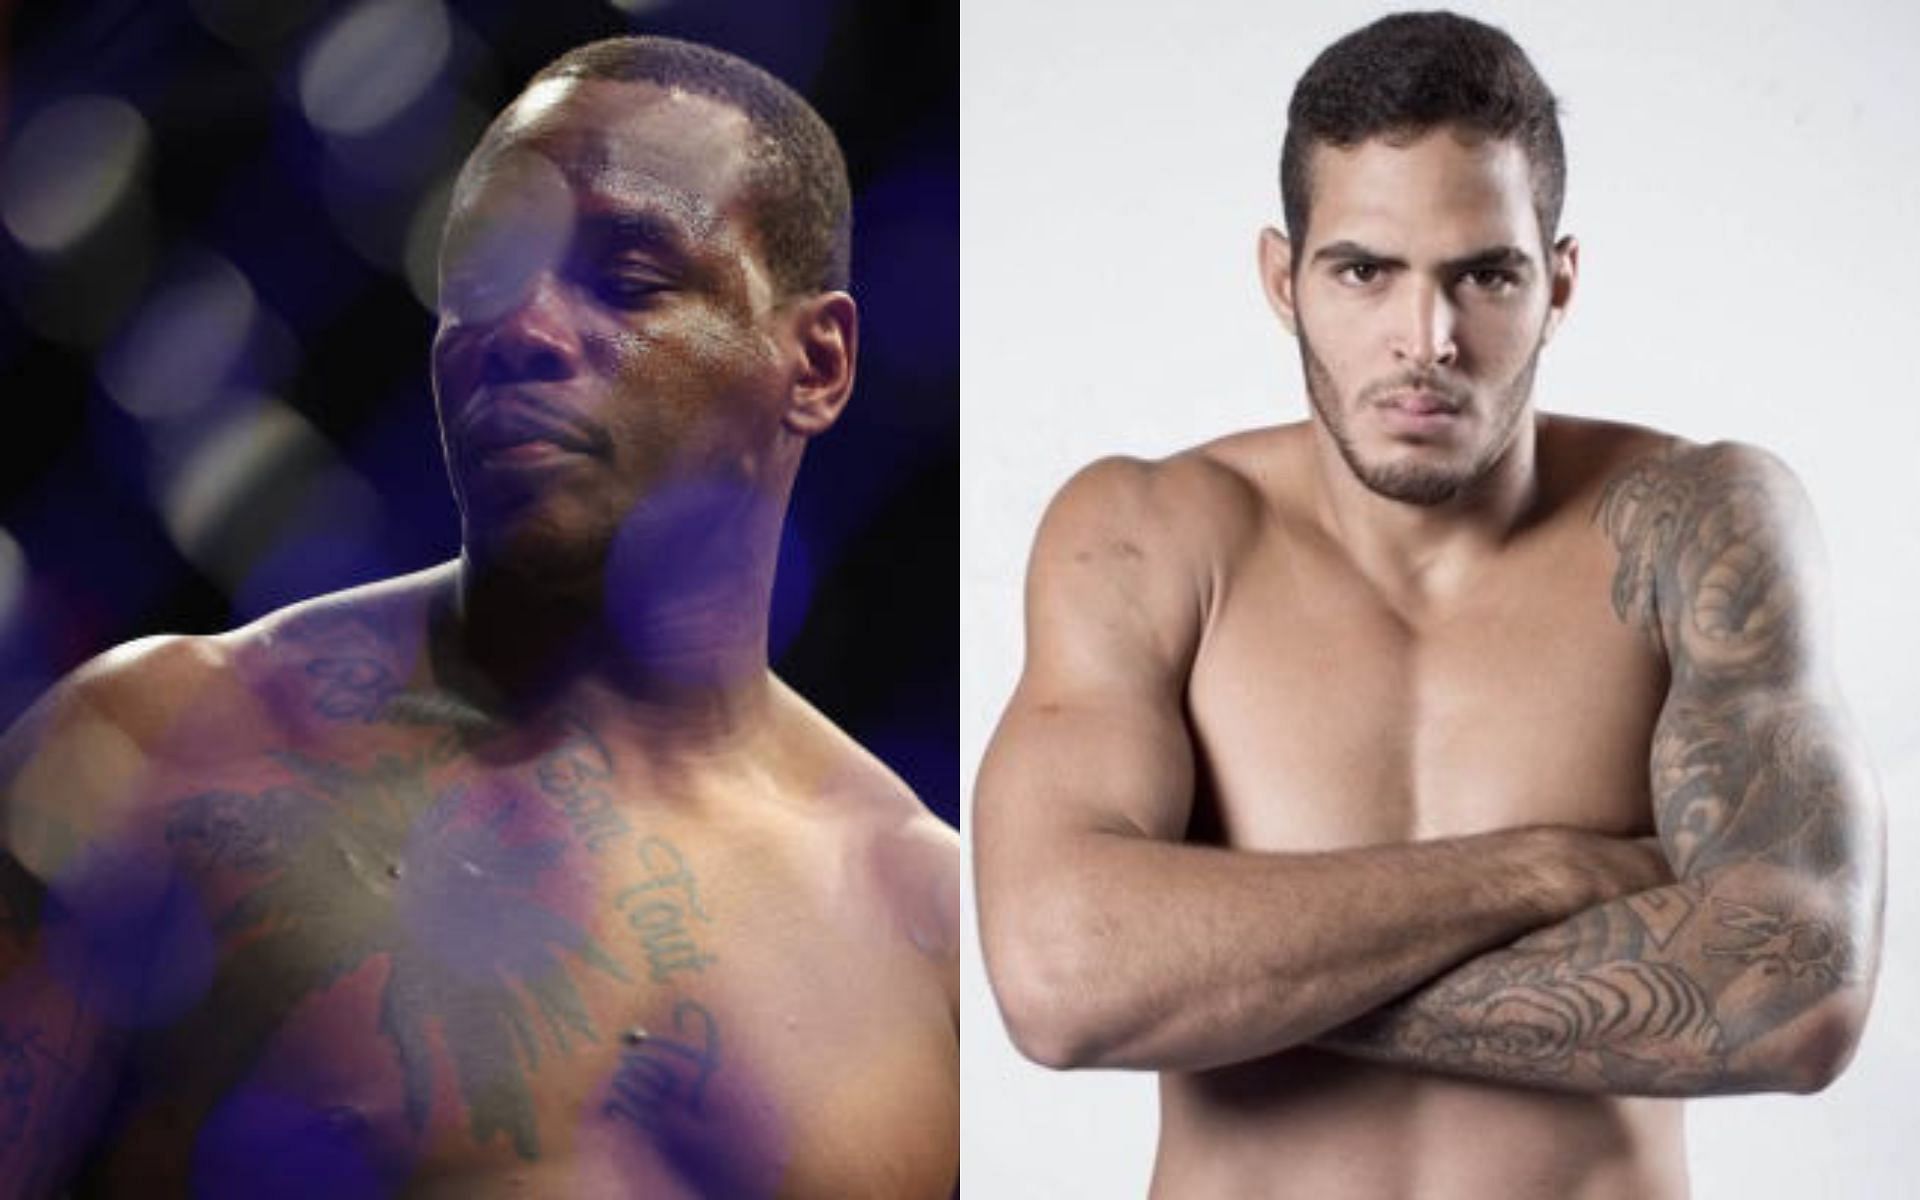 Ovince Saint Preux (left) and Antonio Trocoli (right) [Images via Getty and @atrocolioficial on Instagram]